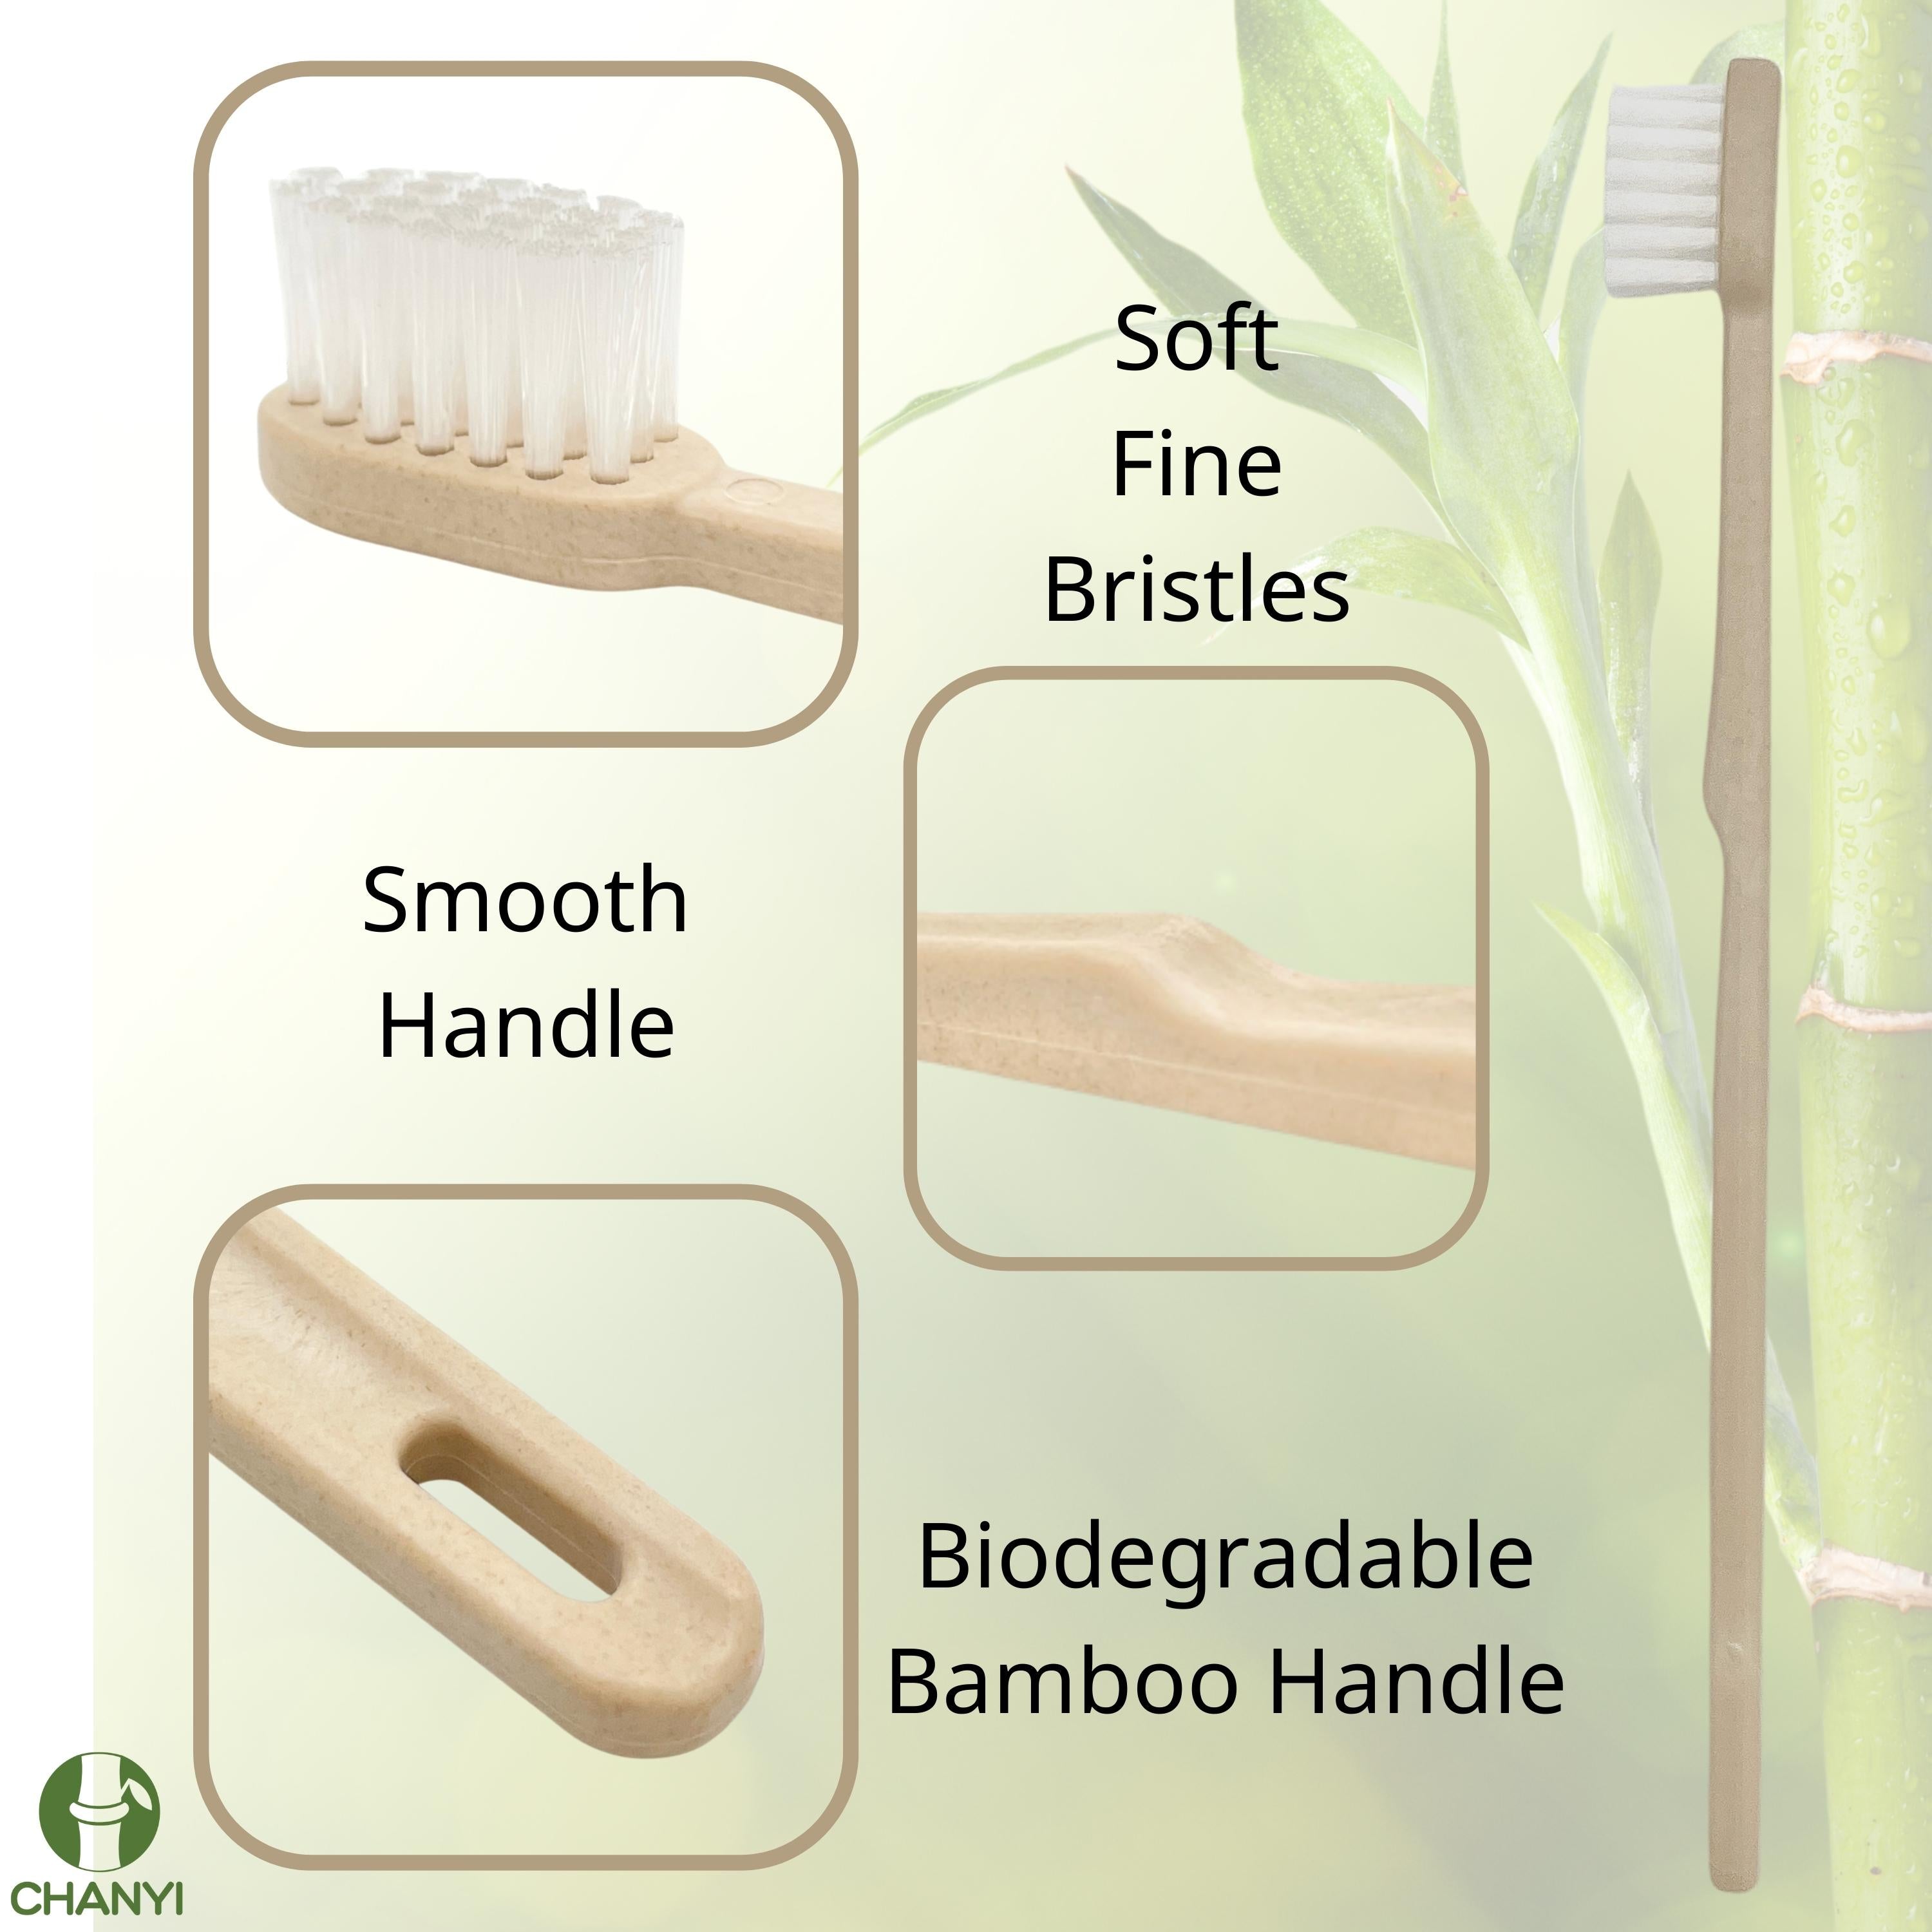 CHANYI Bamboo Toothbrushes - Medium - 100% Plant-Based Bamboo-Fiber Composite, Durable & Splinter Free, Fine BPA Free Bristles, 4 Individually Packaged Brushes - Adult